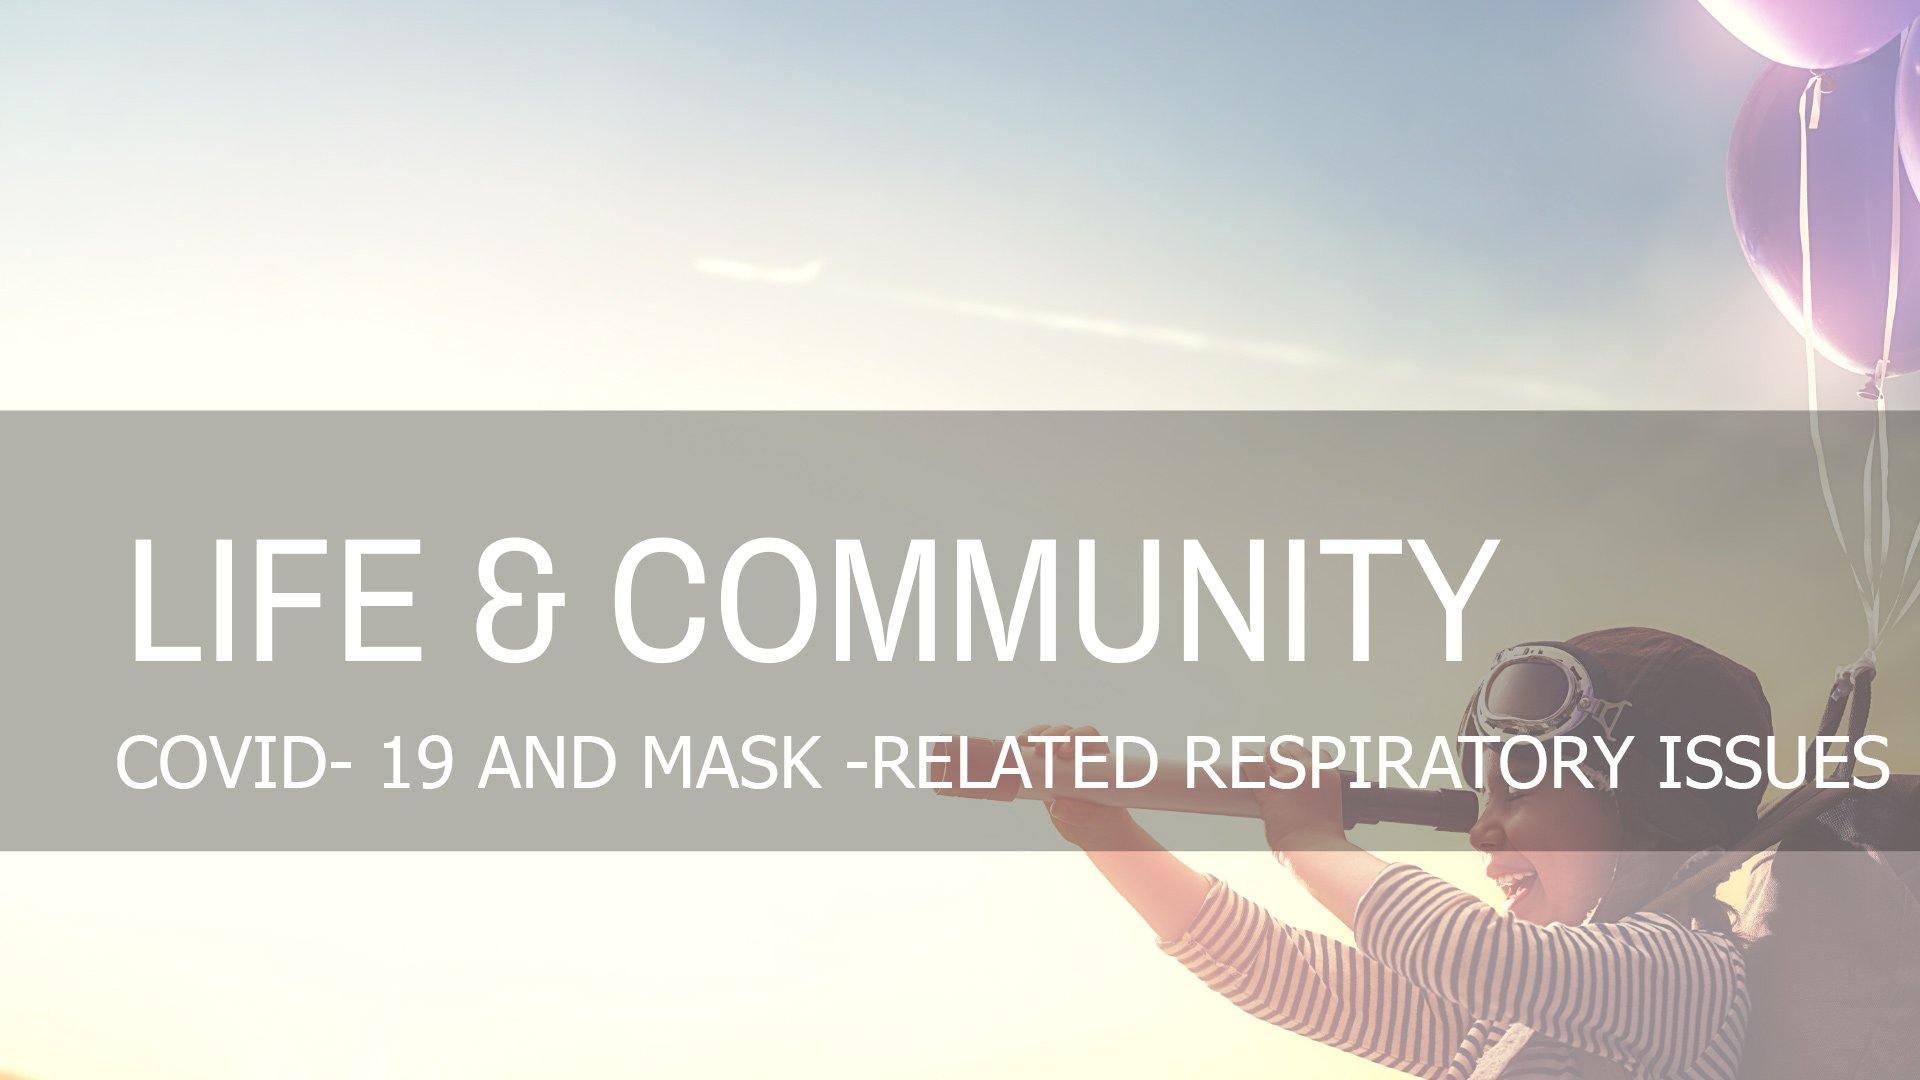 COVID-19 and Mask-Related Respiratory Issues